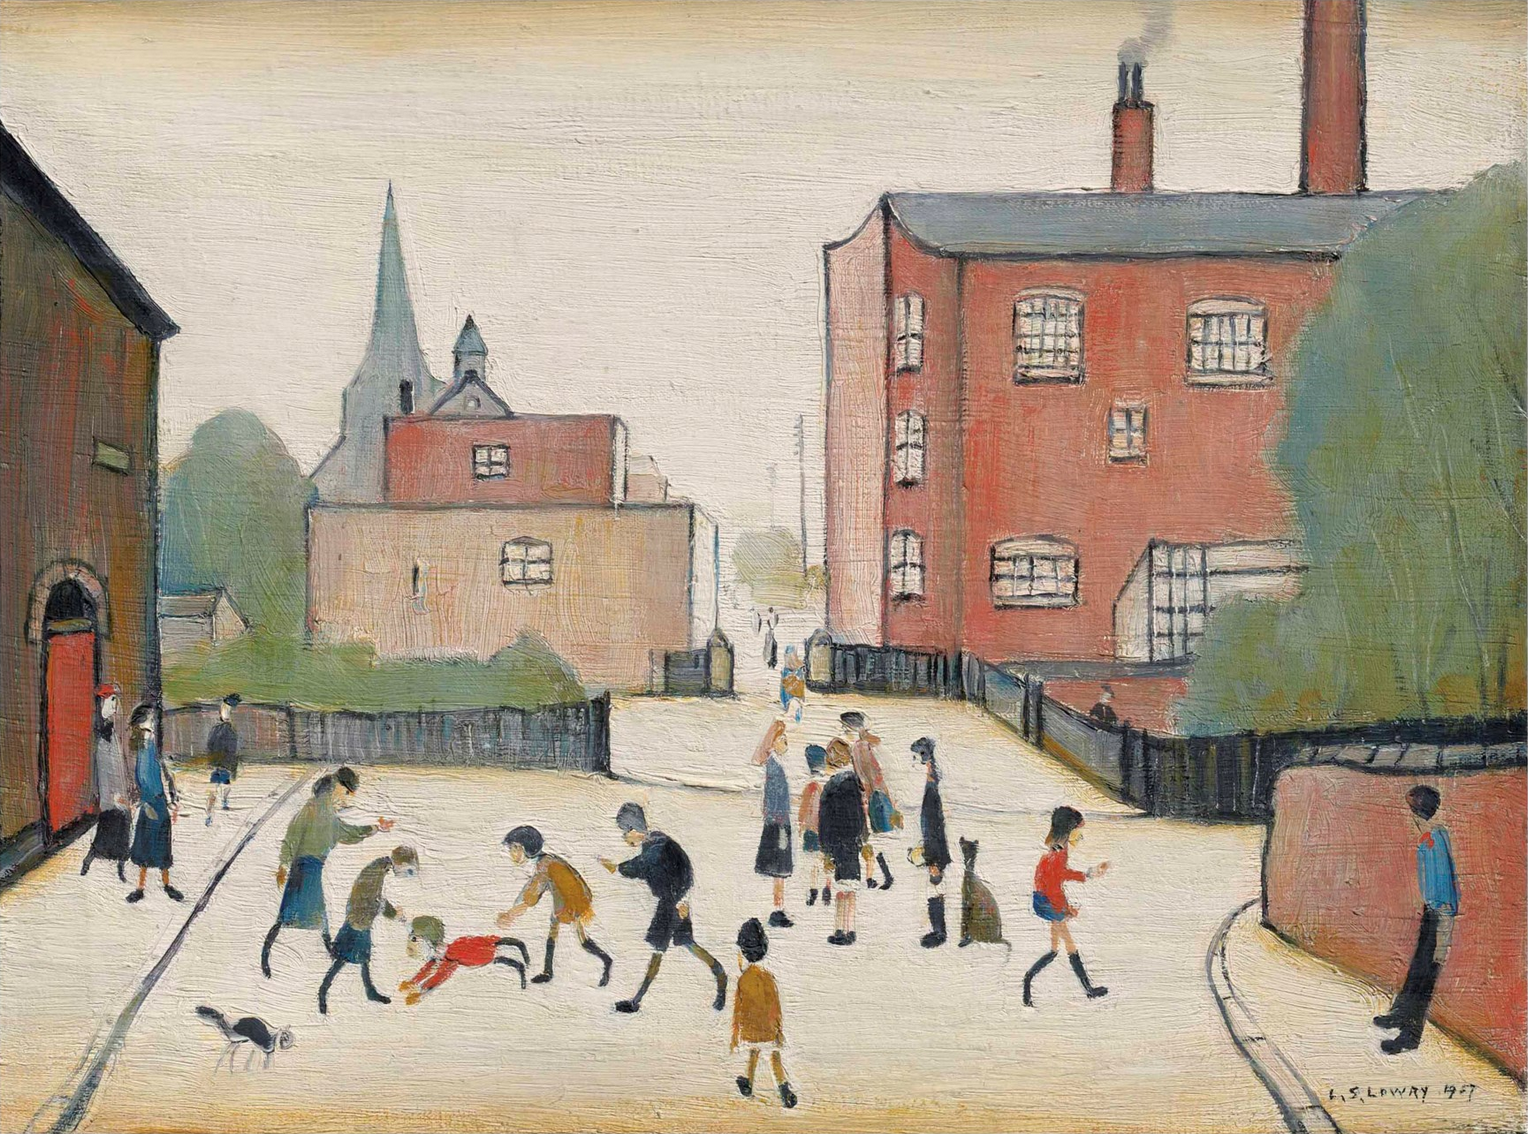 Children Playing, Old Road, Failsworth (1957) by Laurence Stephen Lowry (1887 - 1976), English artist.